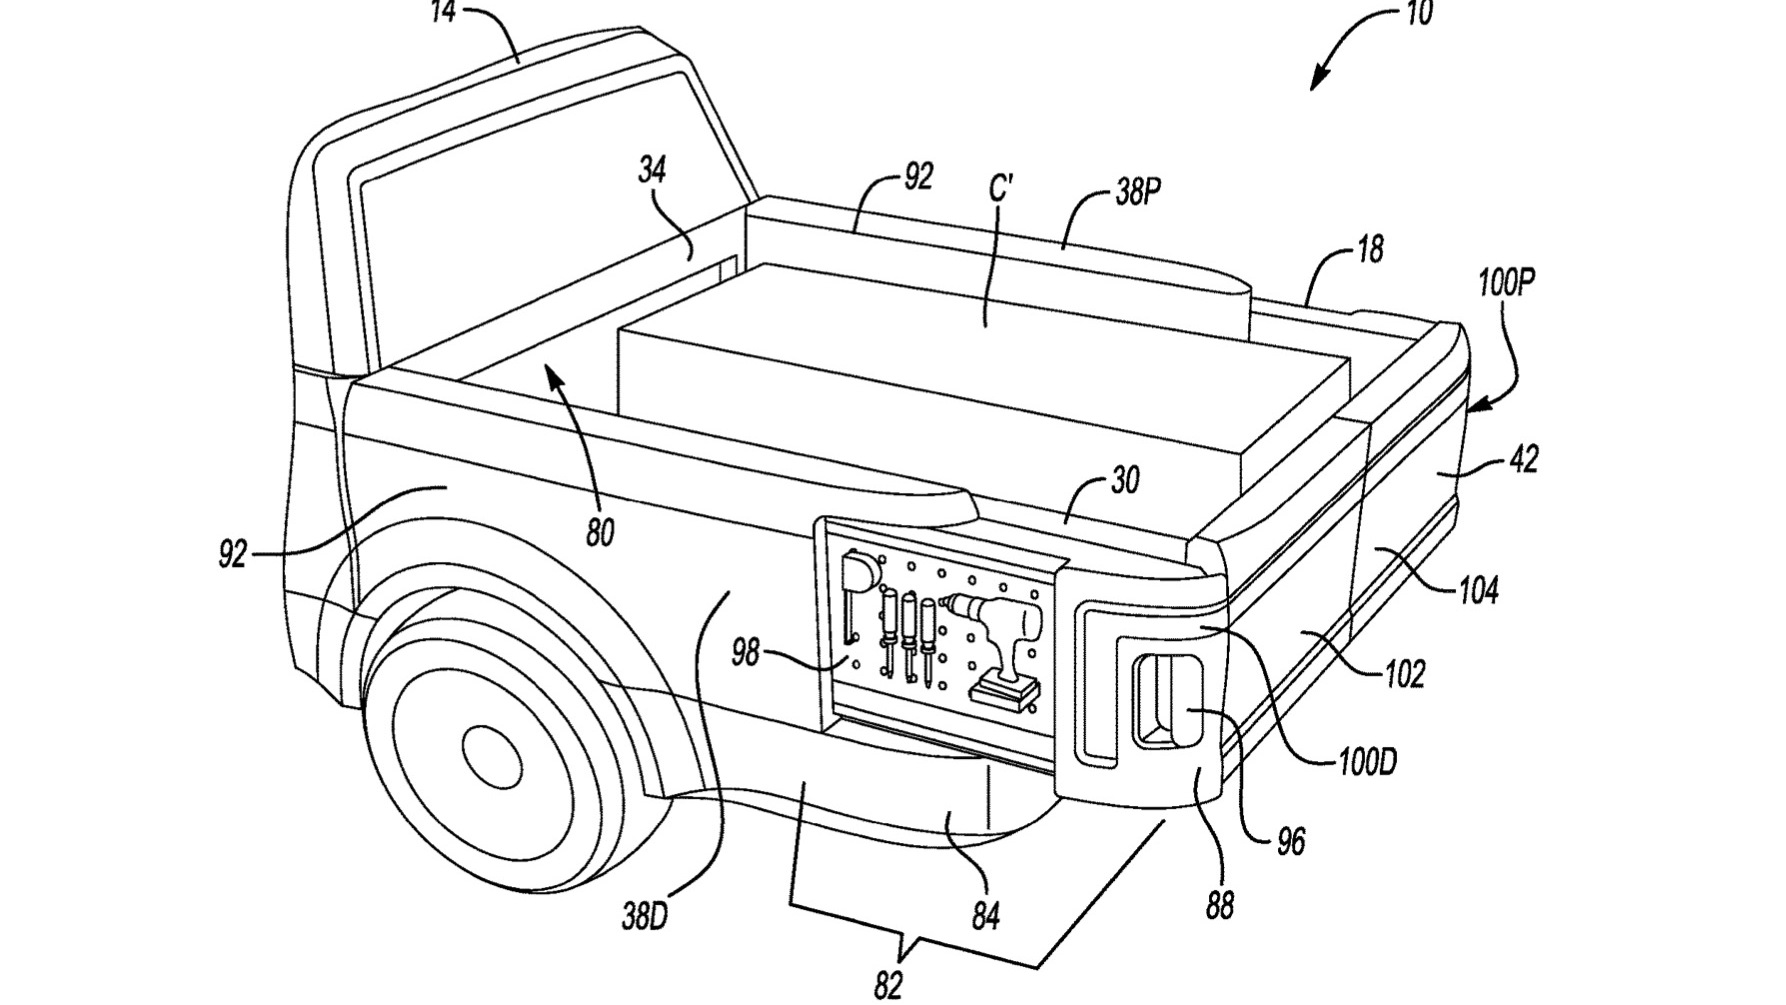 Patent image of Ford extending cargo bed floor and bed walls